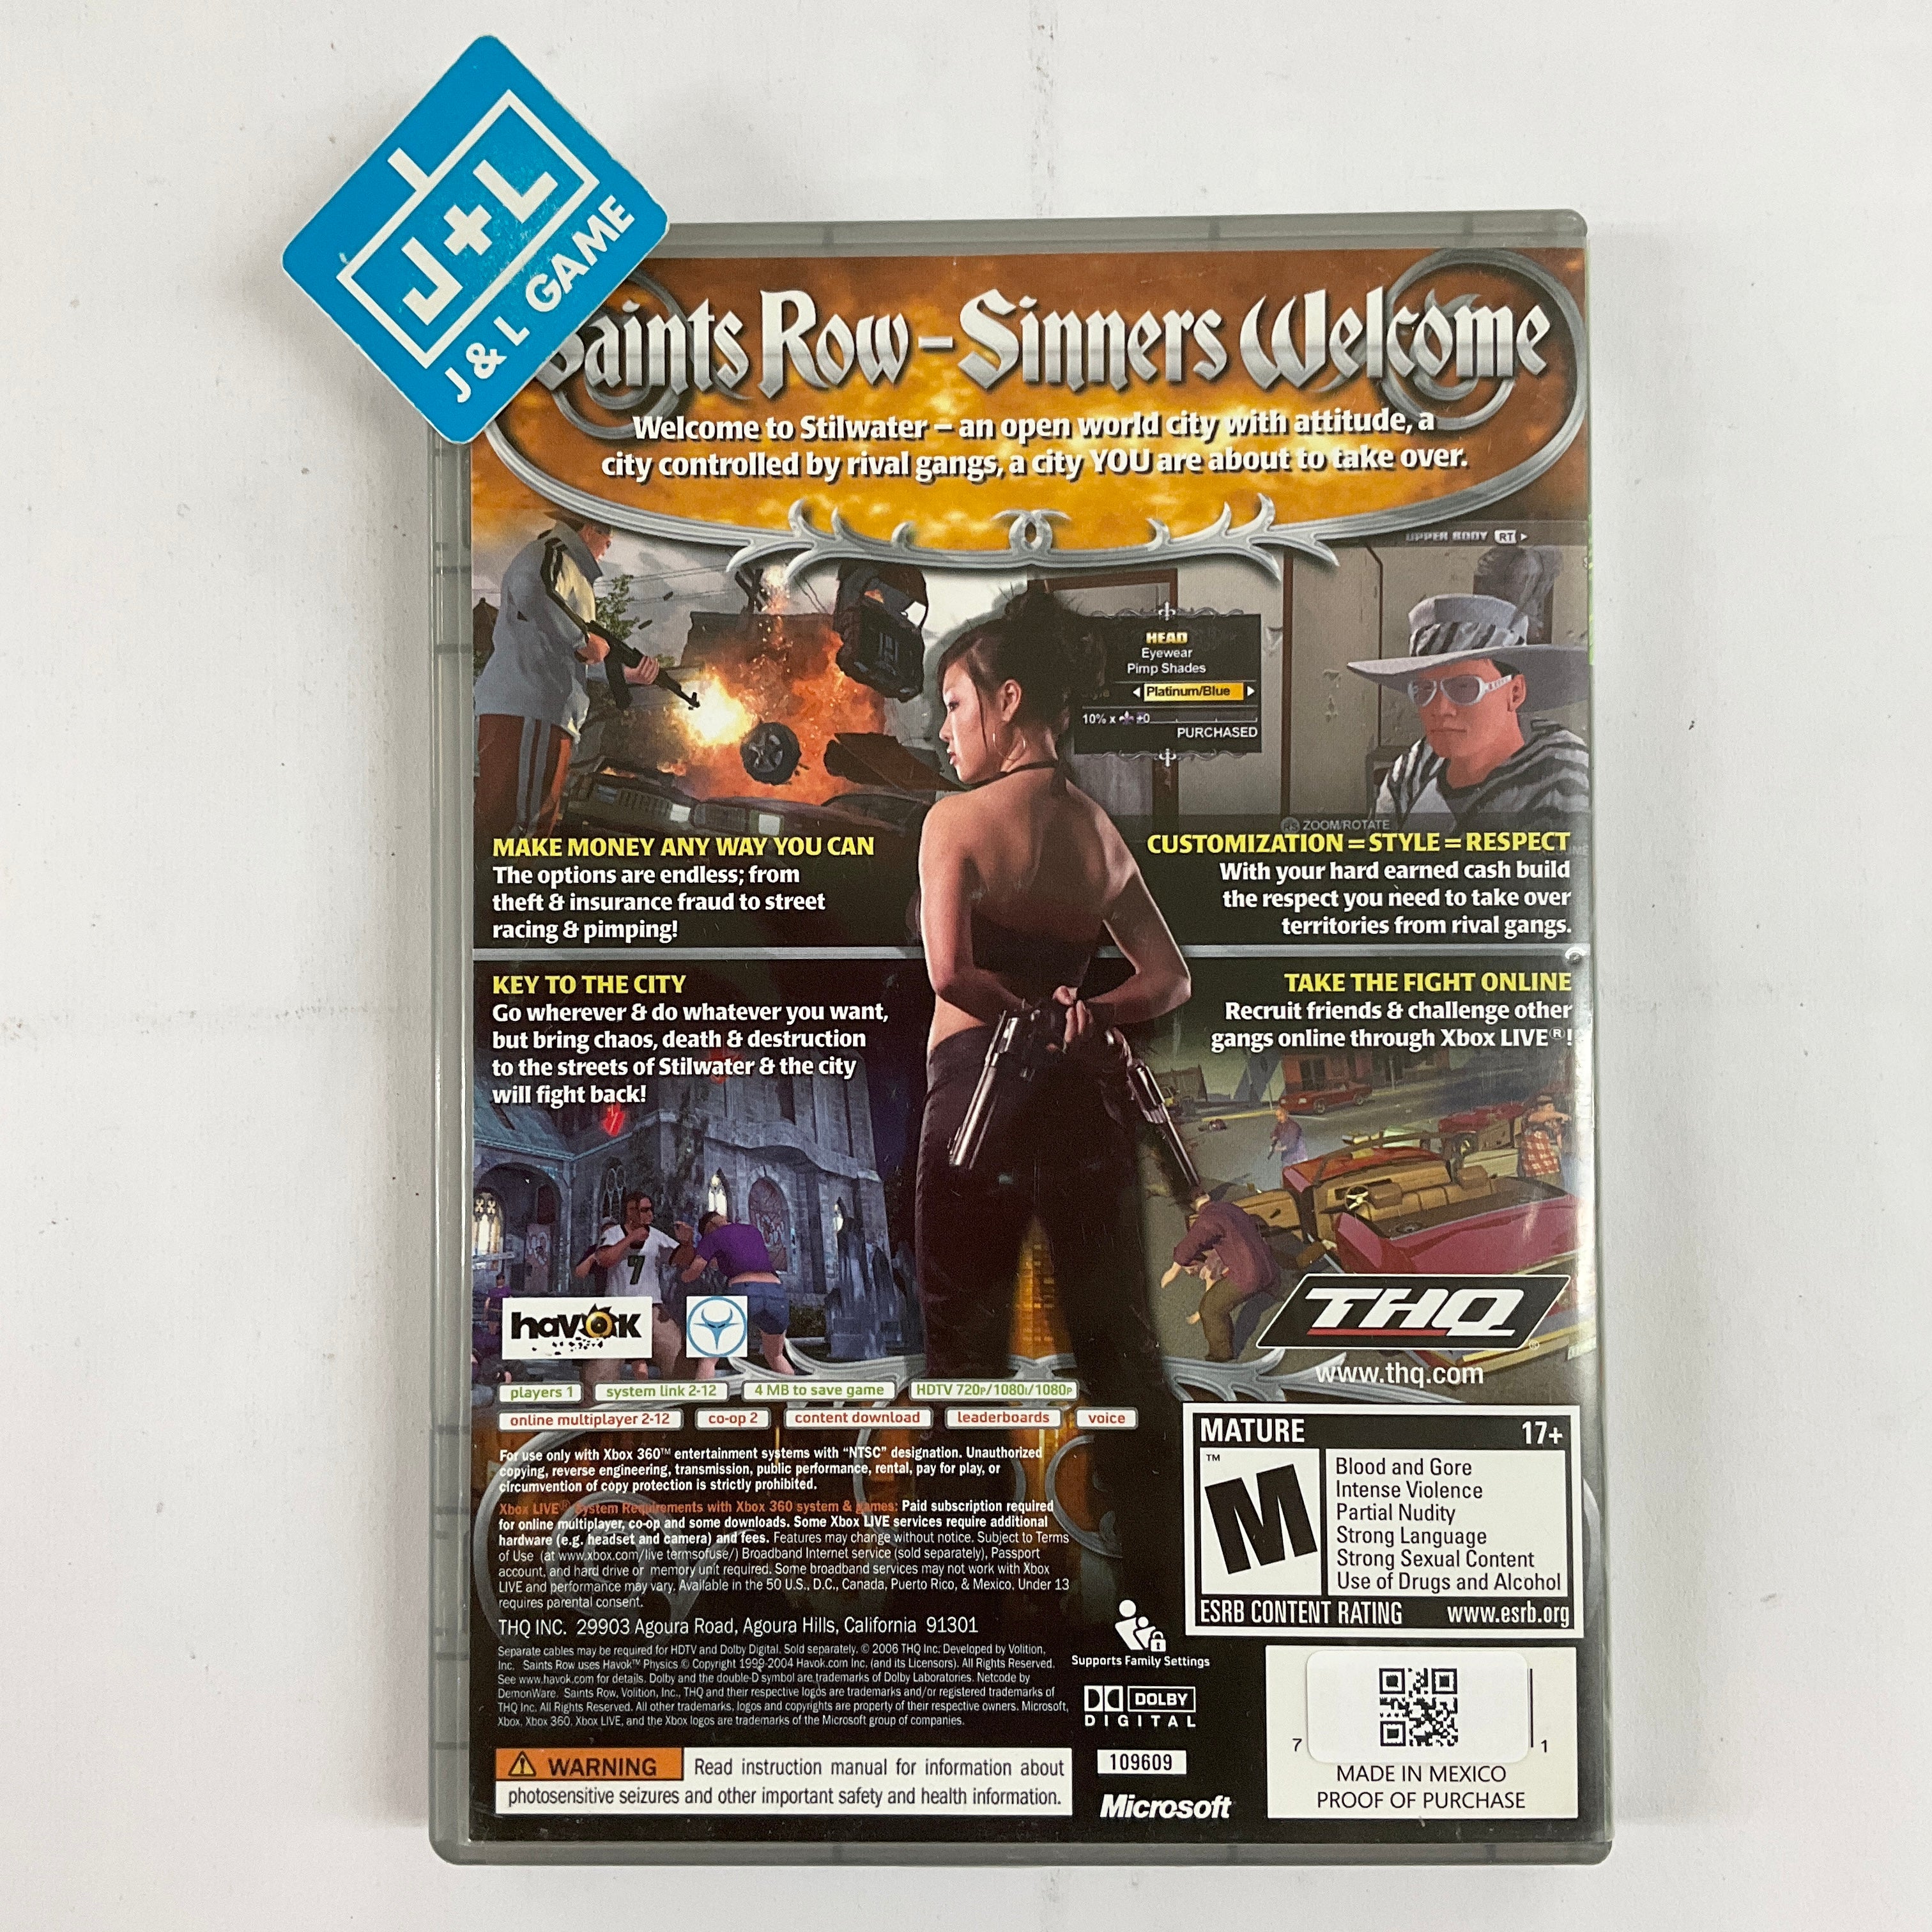 Saints Row (Platinum Hits) - Xbox 360 [Pre-Owned] Video Games THQ   